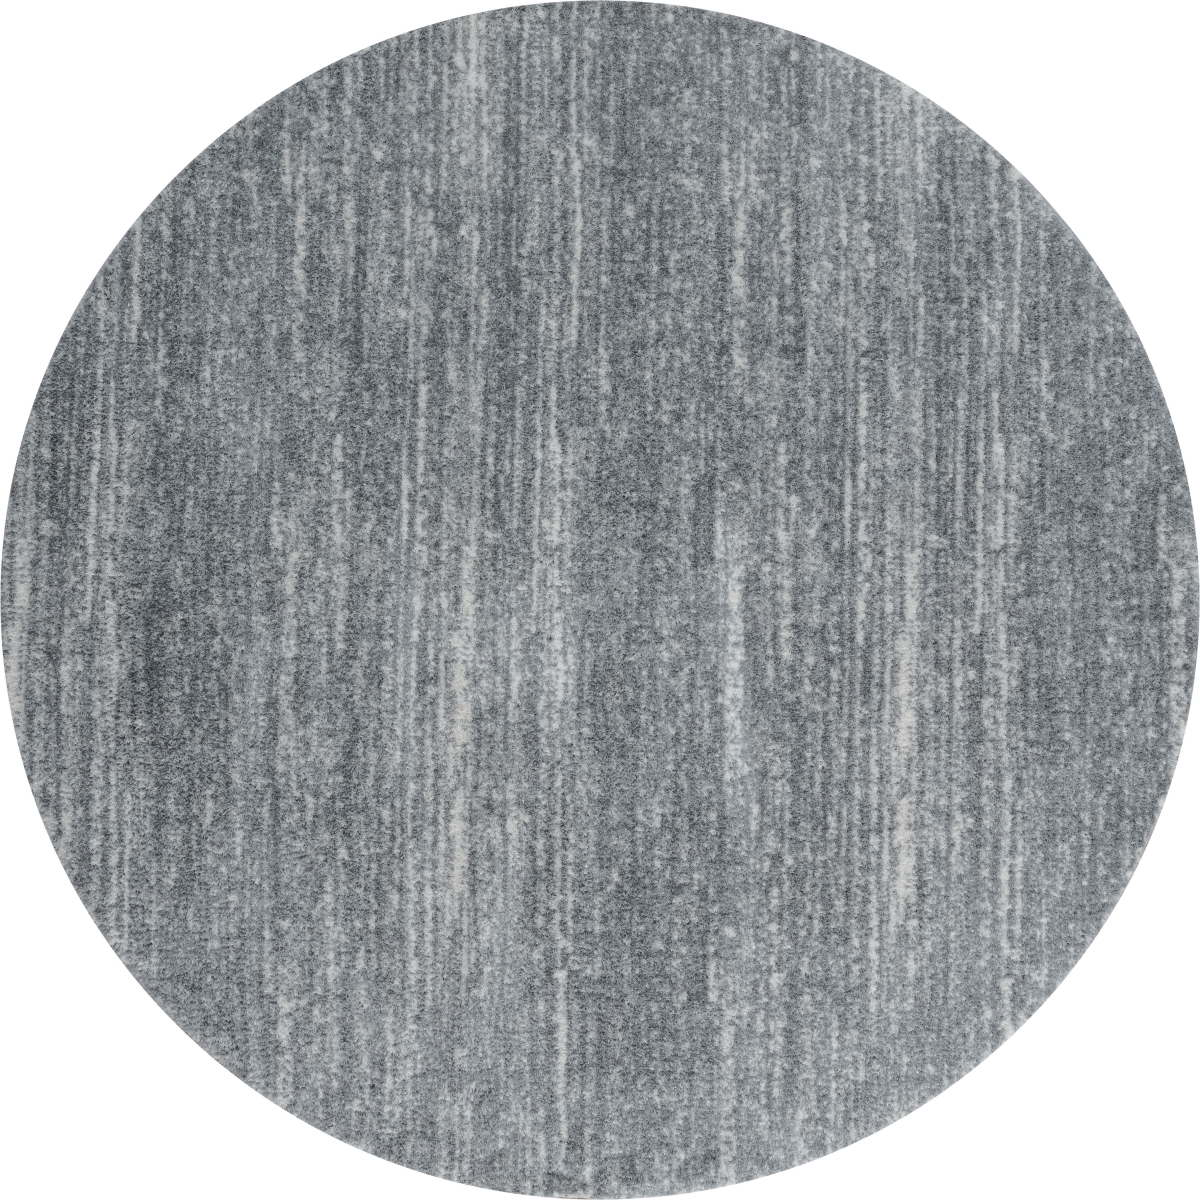 1840 20872 88r 7 Ft. 10 In. X 7 Ft. 10 In. Tranquility Zuelia Gray Round Rug